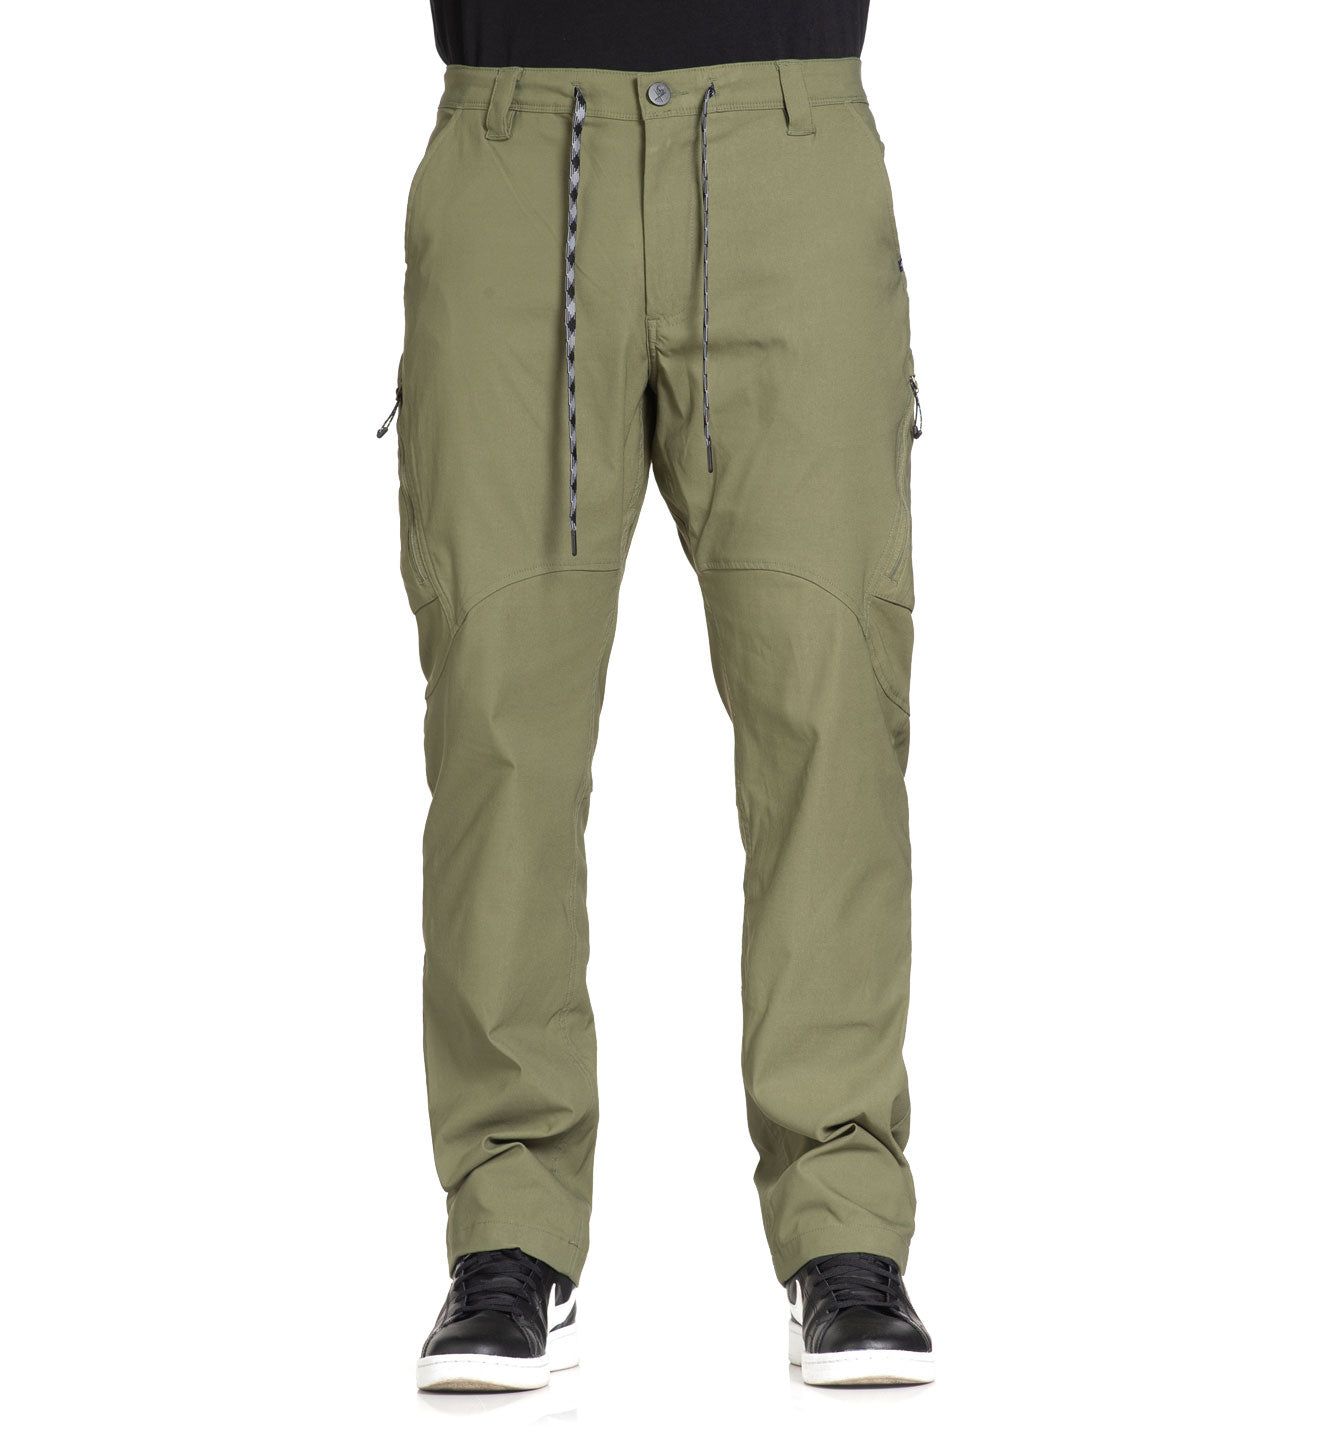 Expedition Stretch Cargo Pants - Olive - 